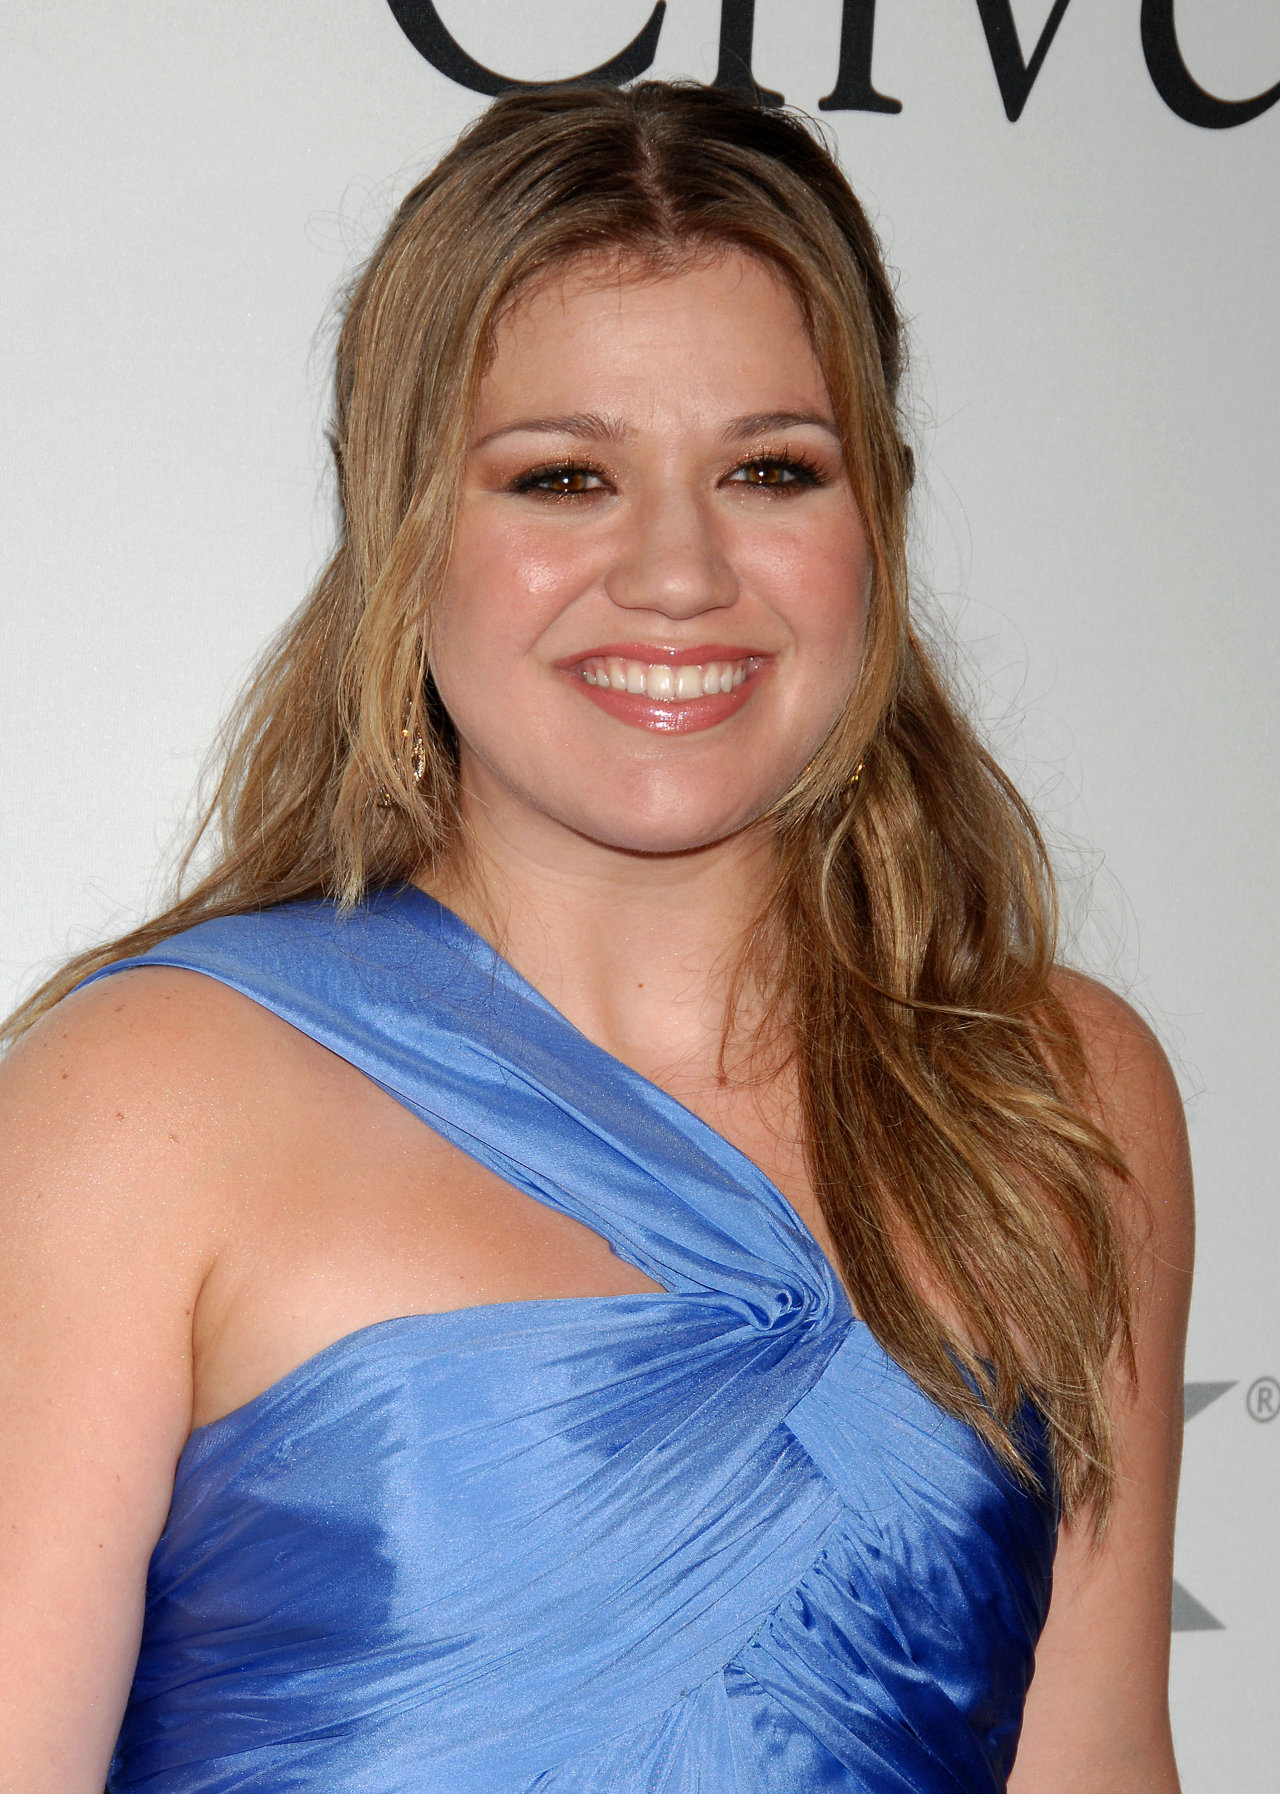 Kelly Clarkson leaked wallpapers